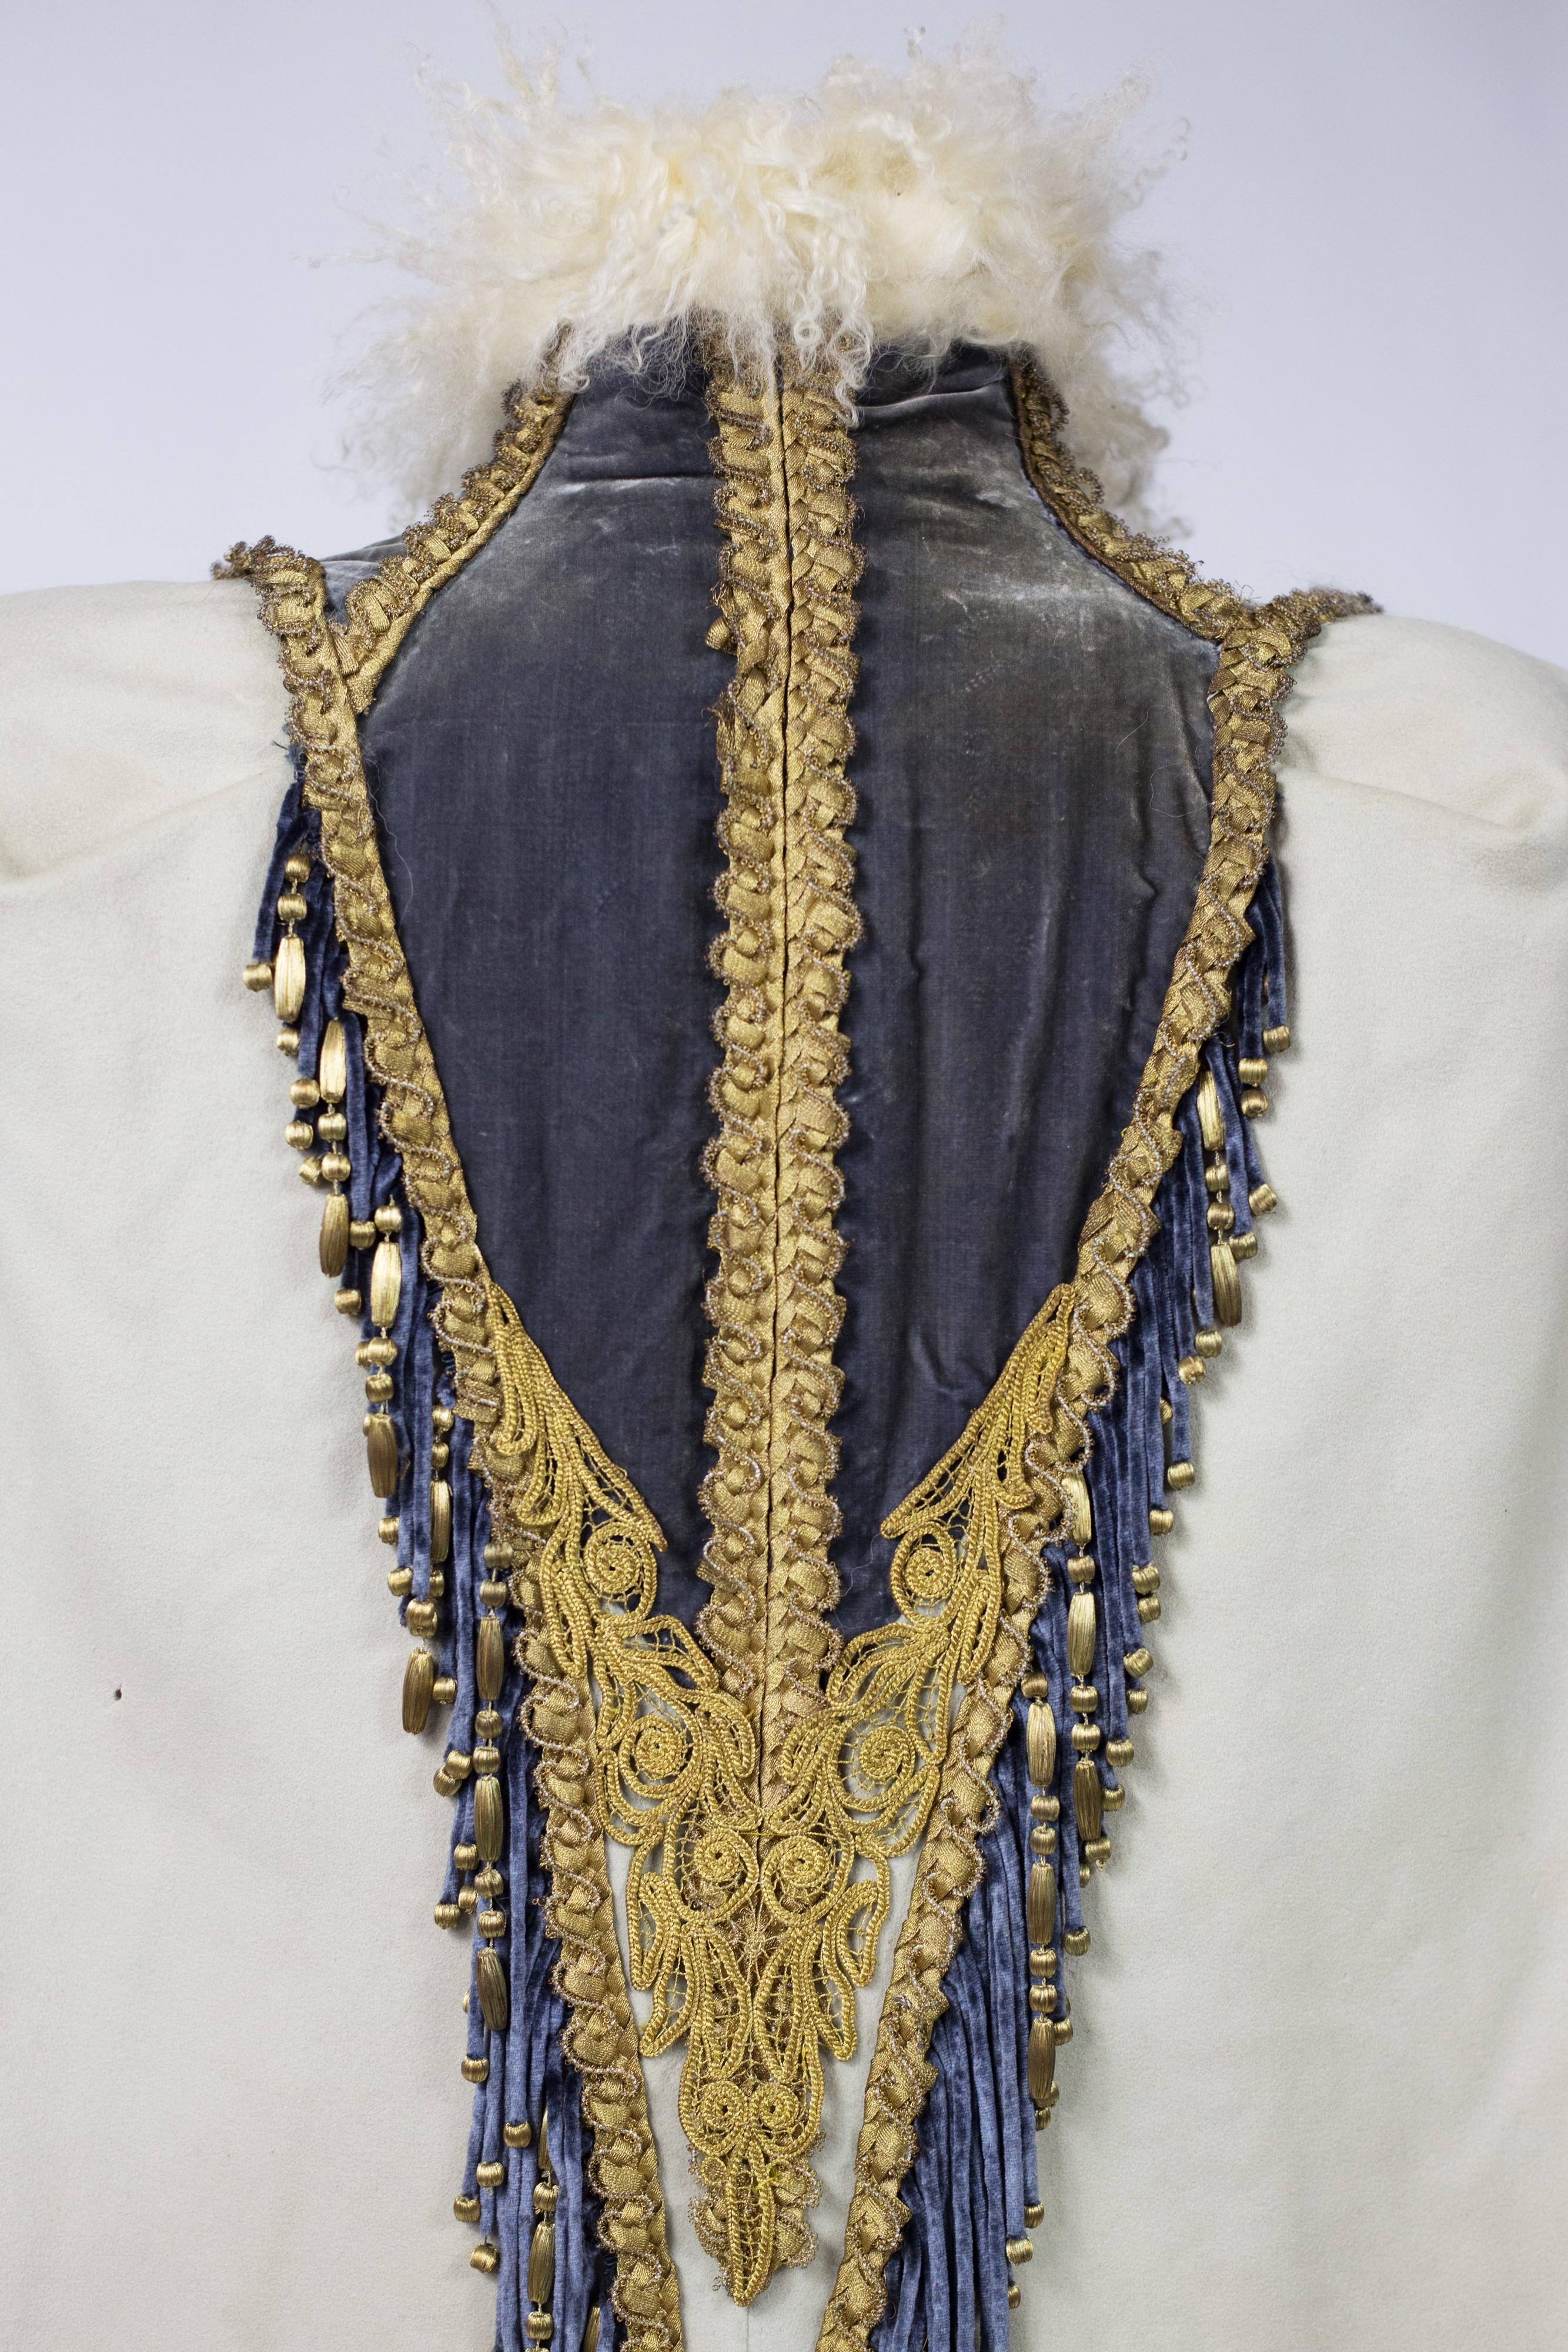 Circa 1890-1895
France Paris
Dolman or Pelisse for the evening in wool felt eau du Nil with small Médicis collar, signed Emile Pingat, 30 Rue Louis le Grand Paris. The collar is made of cream curly Mongolian lamb fur (?). From the collar and